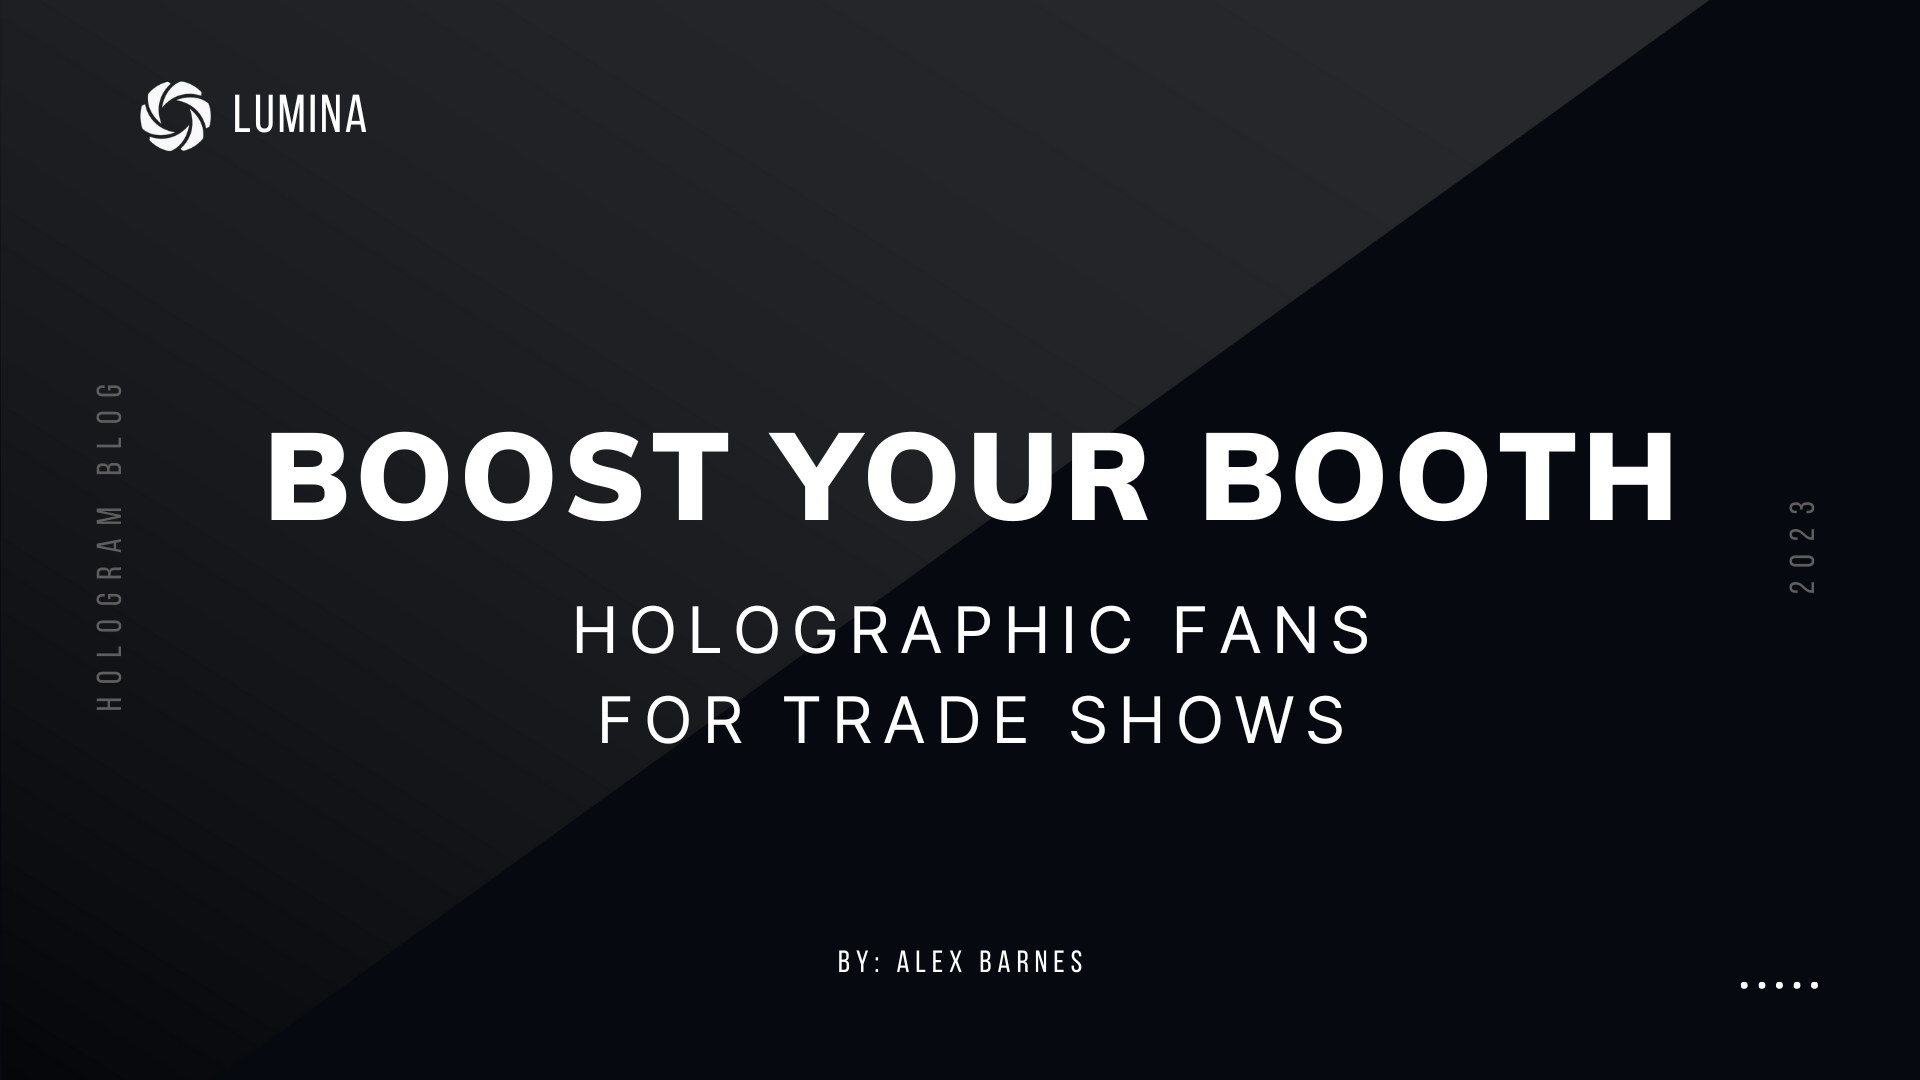 Title Graphic - Trade Shows